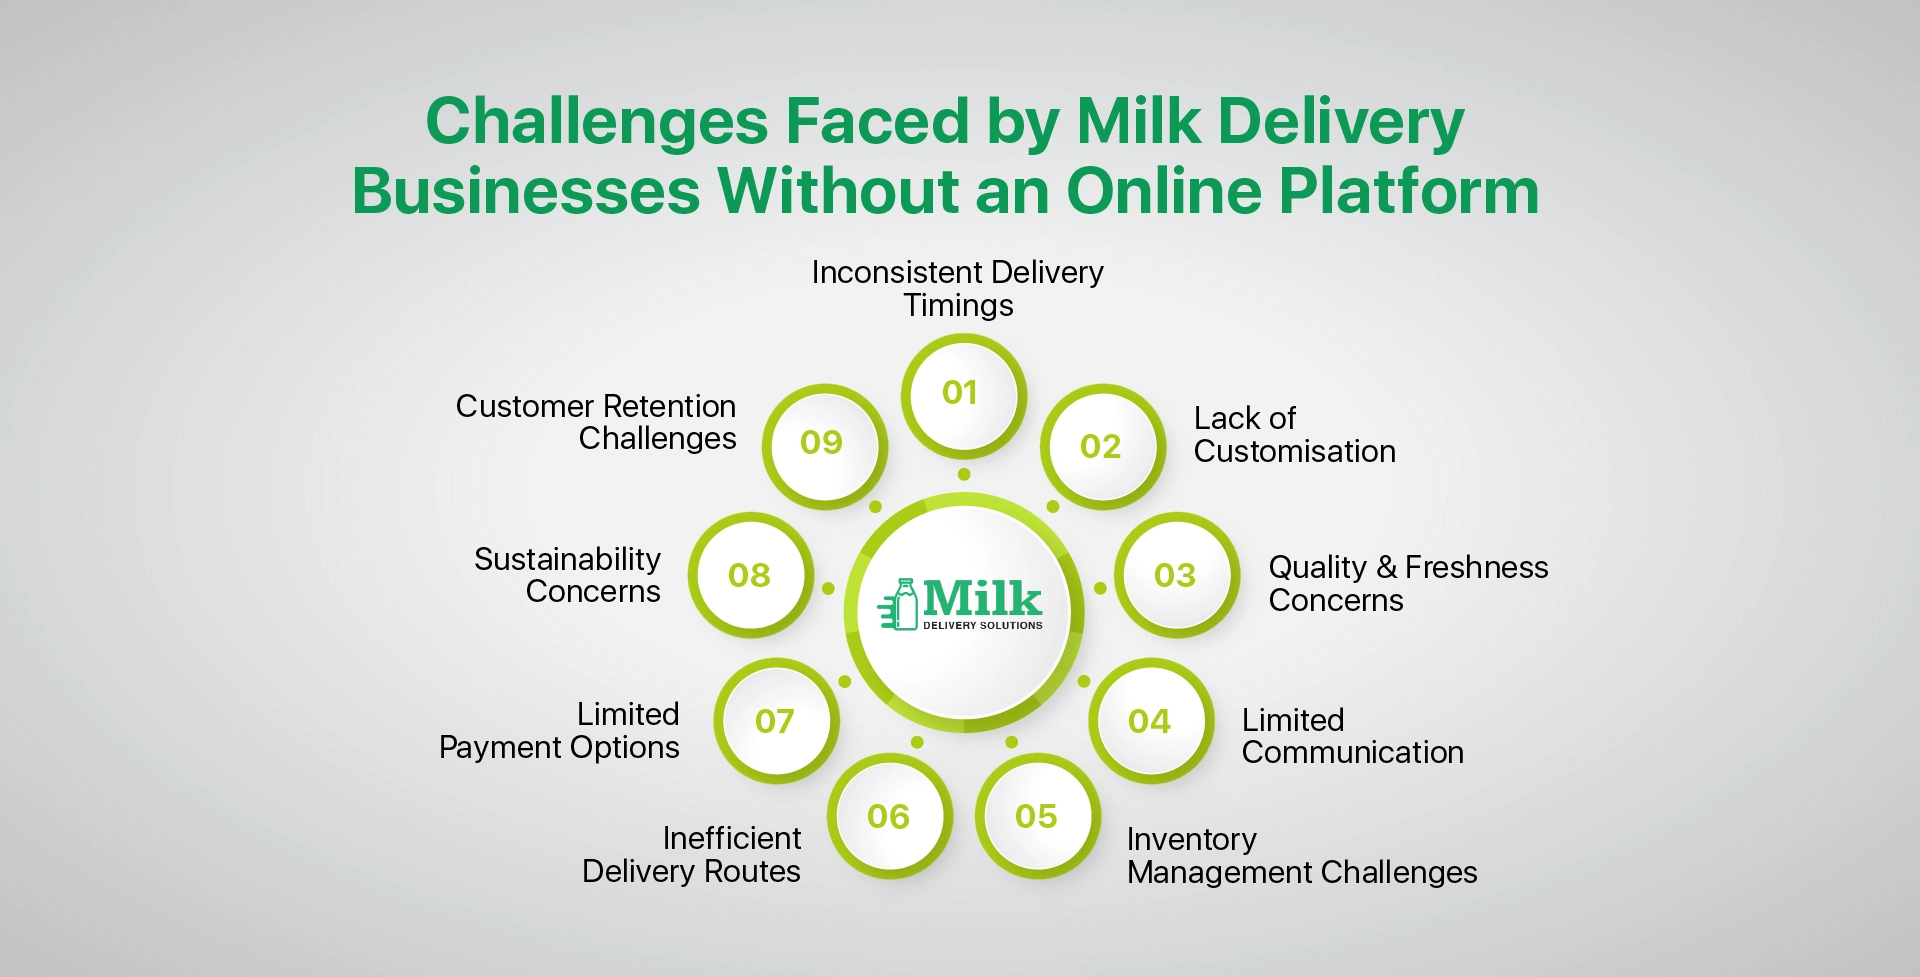 ravi garg, mds, challenges, milk delivery business, online platform, delivery timings, customisation, quality and freshness, communication, inventory management, delivery routes, payment options, sustainability, customer retention 